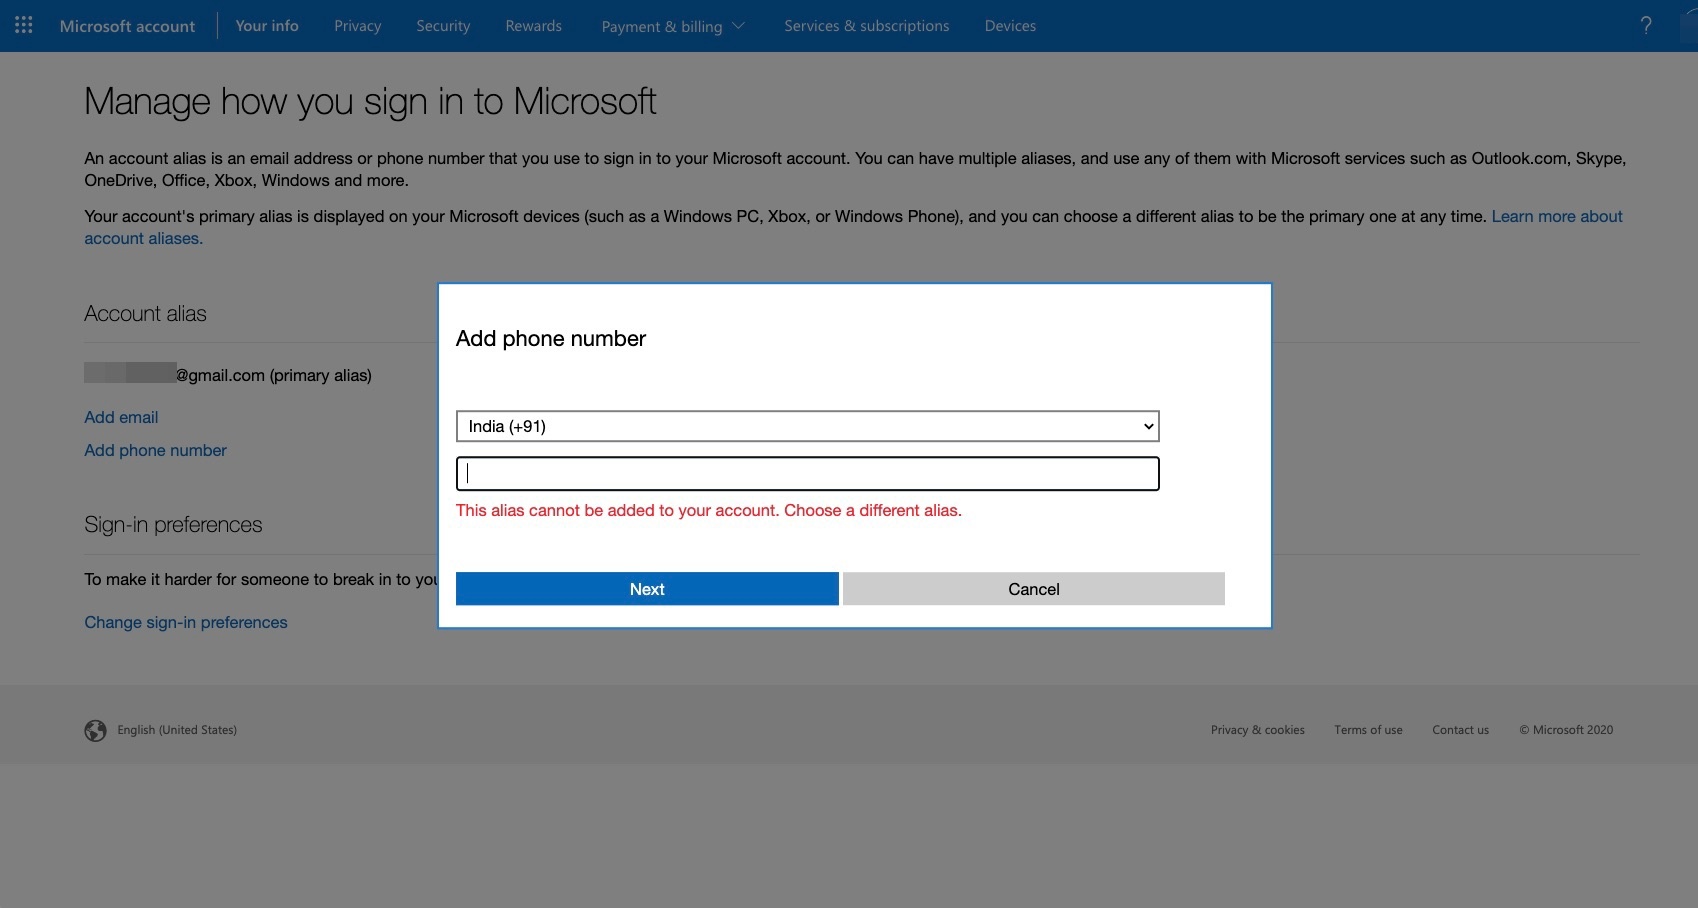 Contact us at Microsoft support (Xbox Payment Error) - Microsoft